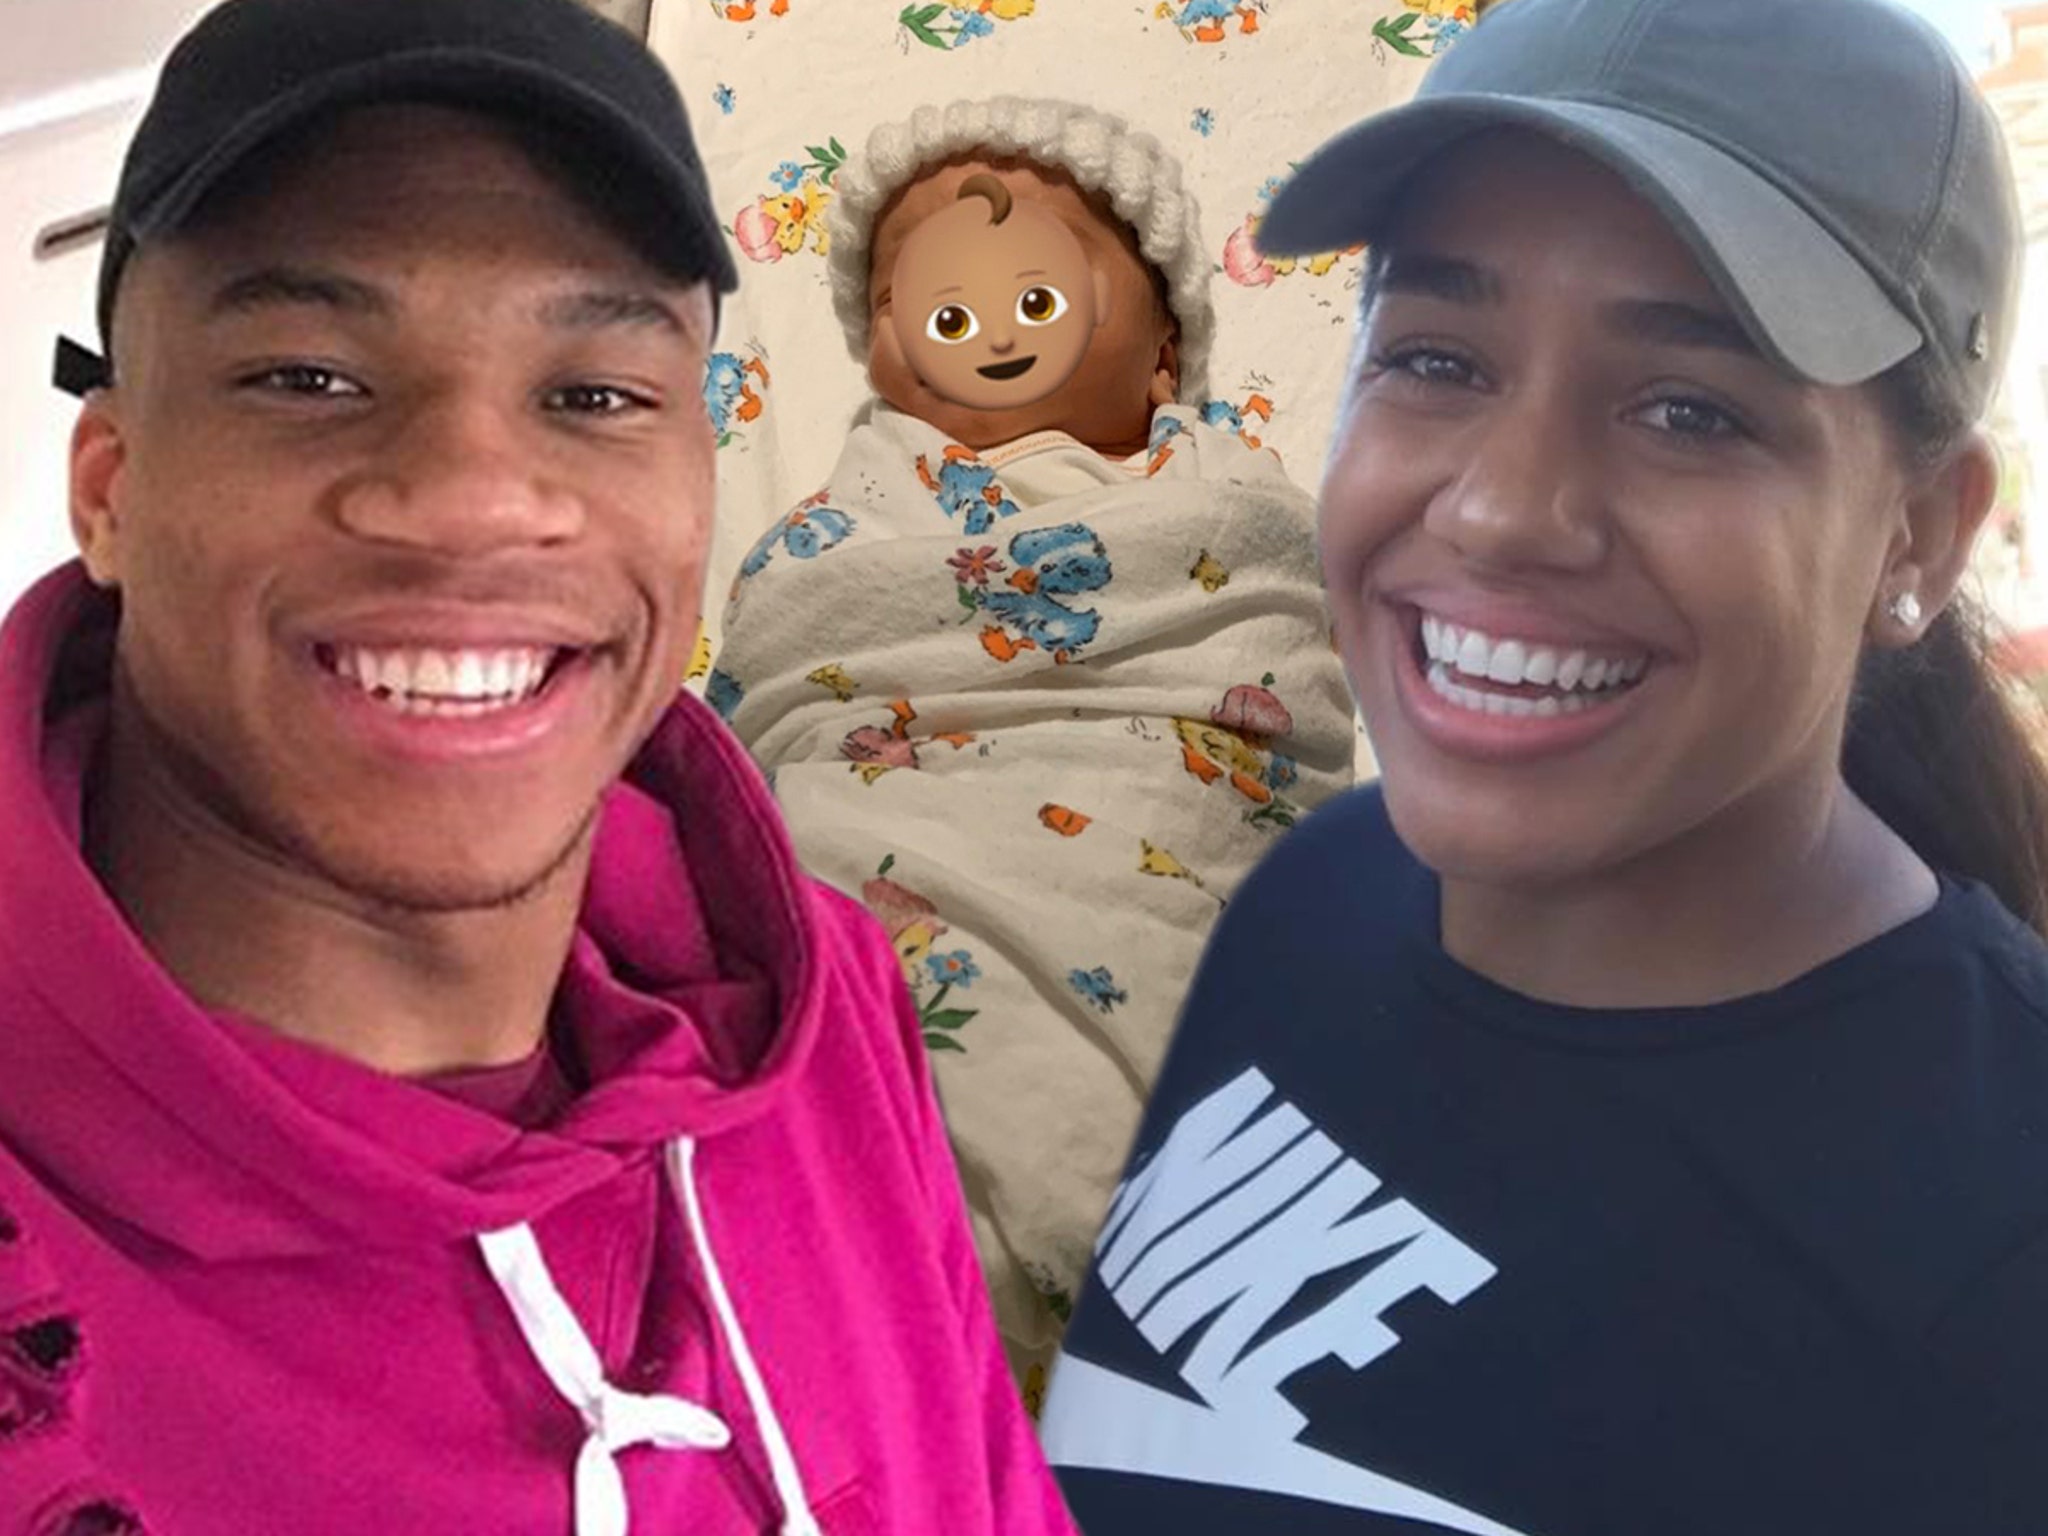 Baby number 3 on the way for Giannis Antetokounmpo and girlfriend